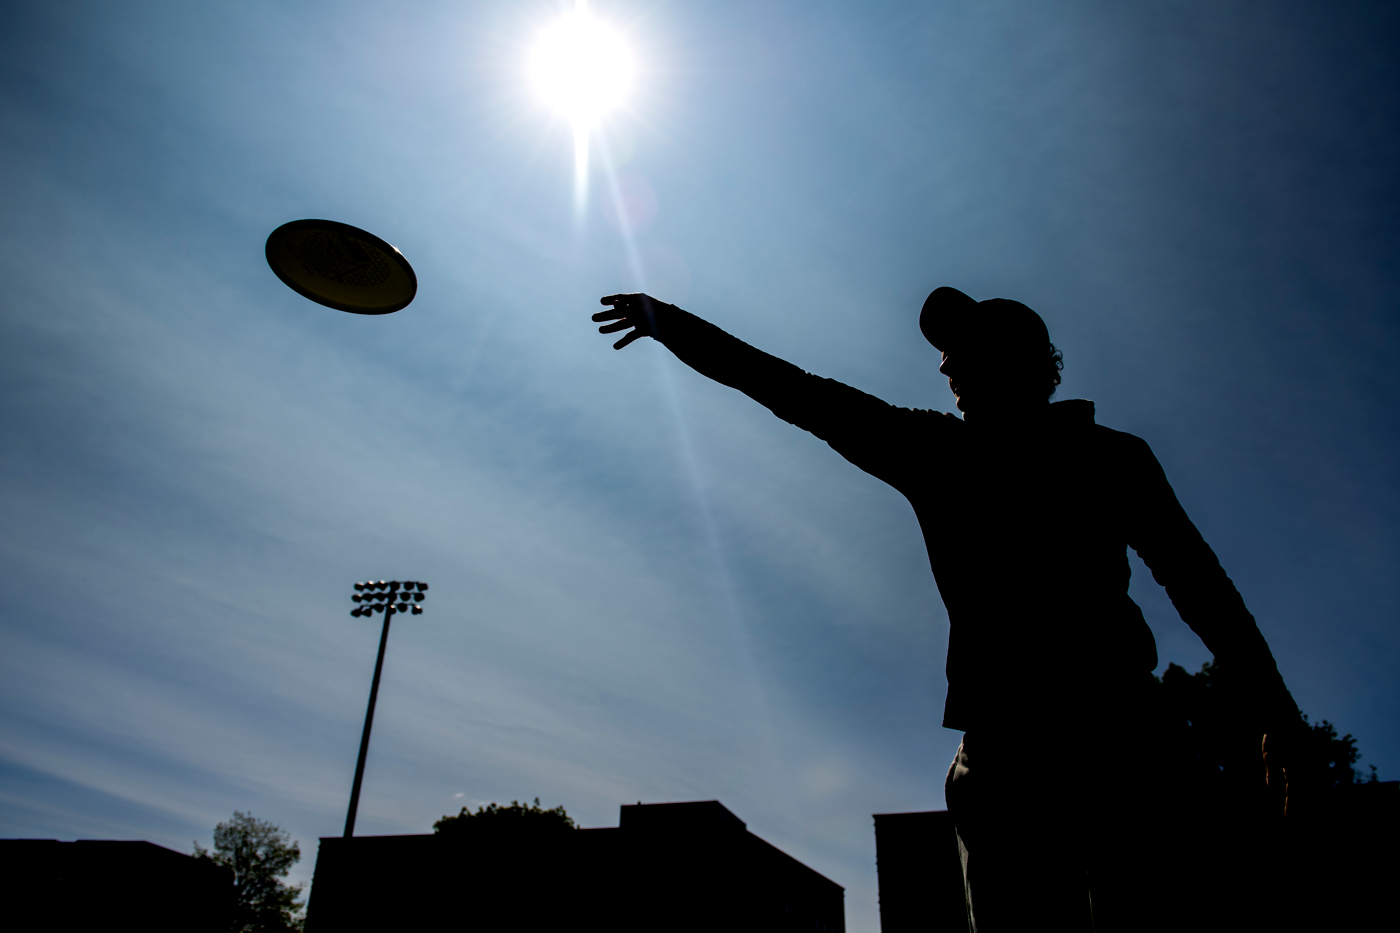 Northeastern University ultimate frisbee program to compete in the 2019